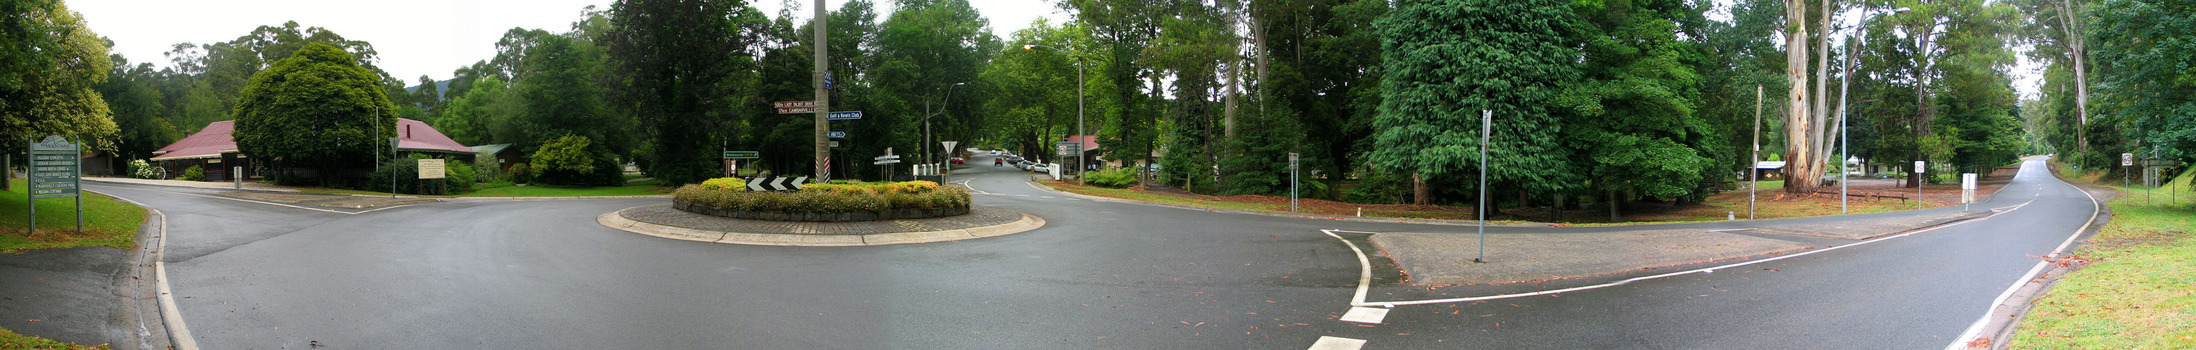 Shows Murchison Street in Marysville in Victoria. Shows the view looking up Murchison Street from the roundabout at the corner with the Marysville-Buxton Road. In the left of the photograph is The Crossways Hotel.